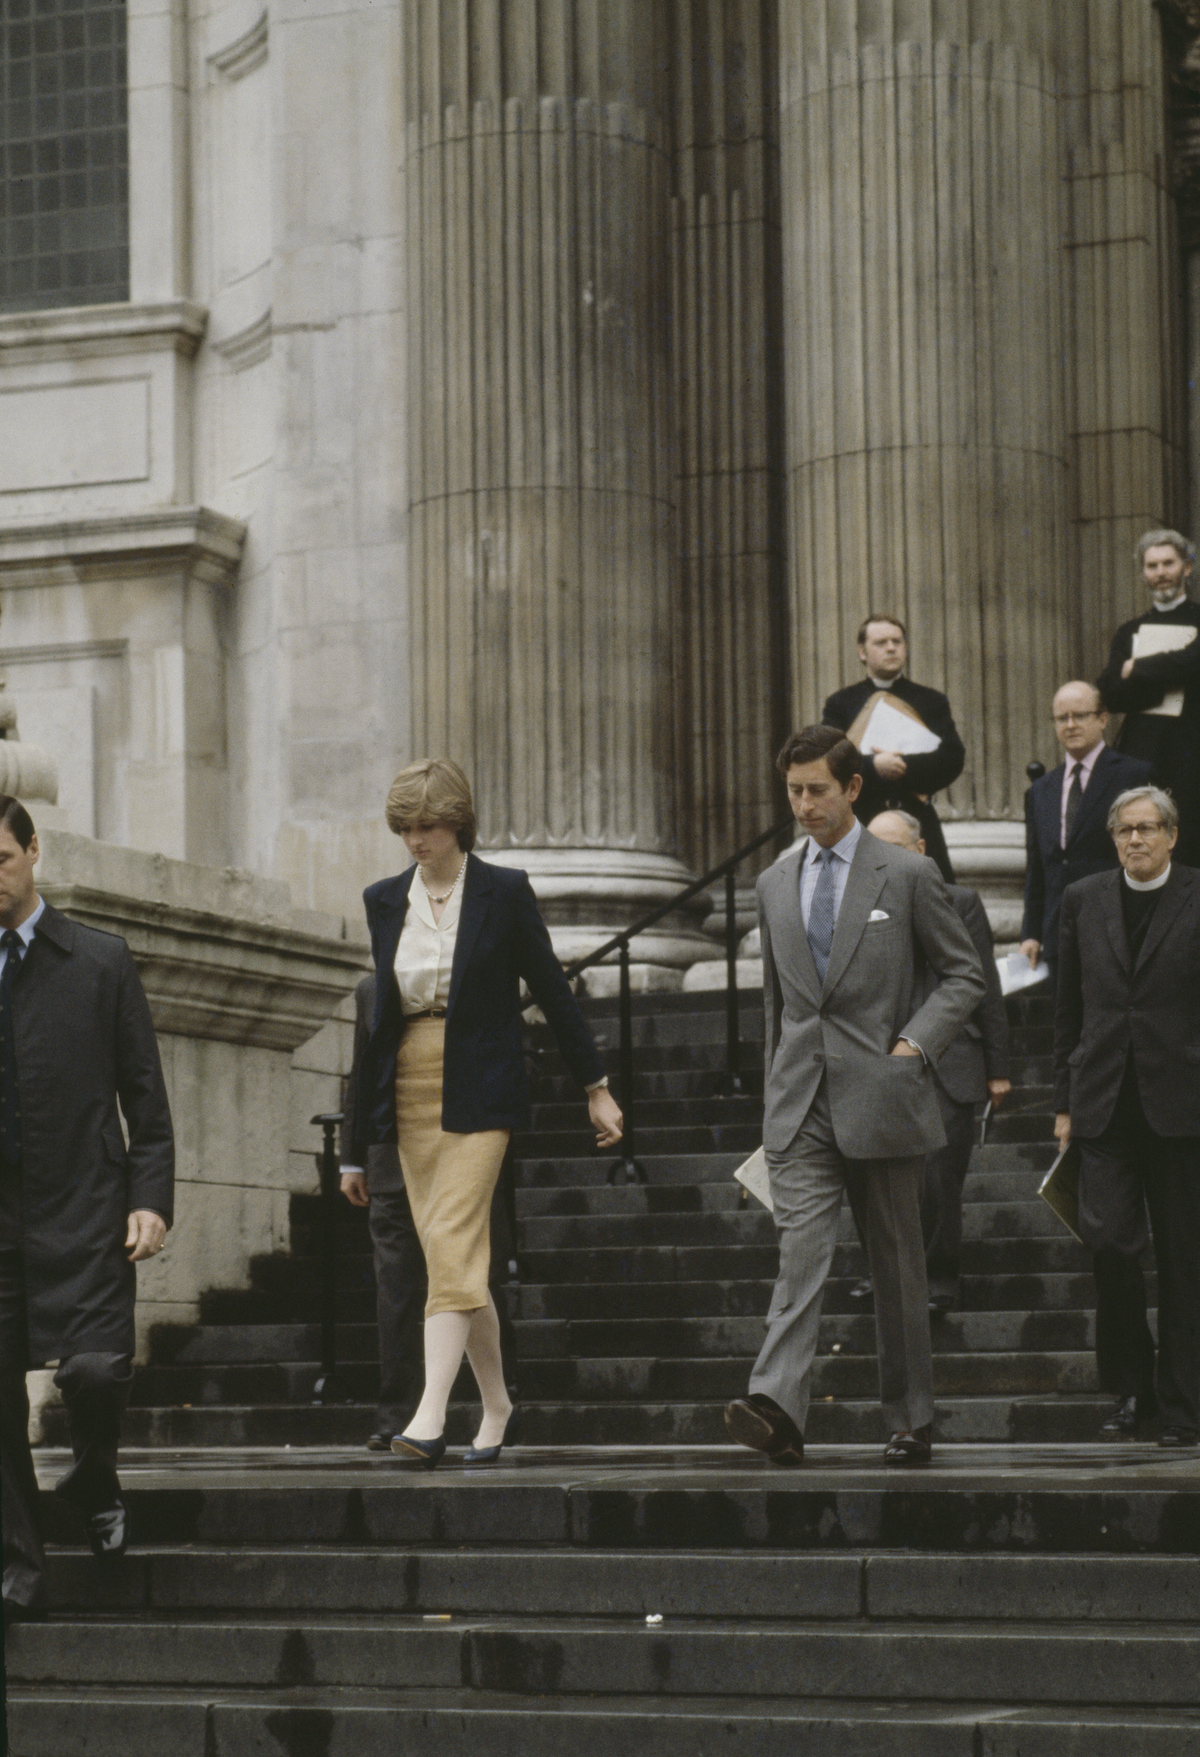 Princess Diana and Prince Charles walk down the steps of St. Paul's Cathedral after their first wedding rehearsal